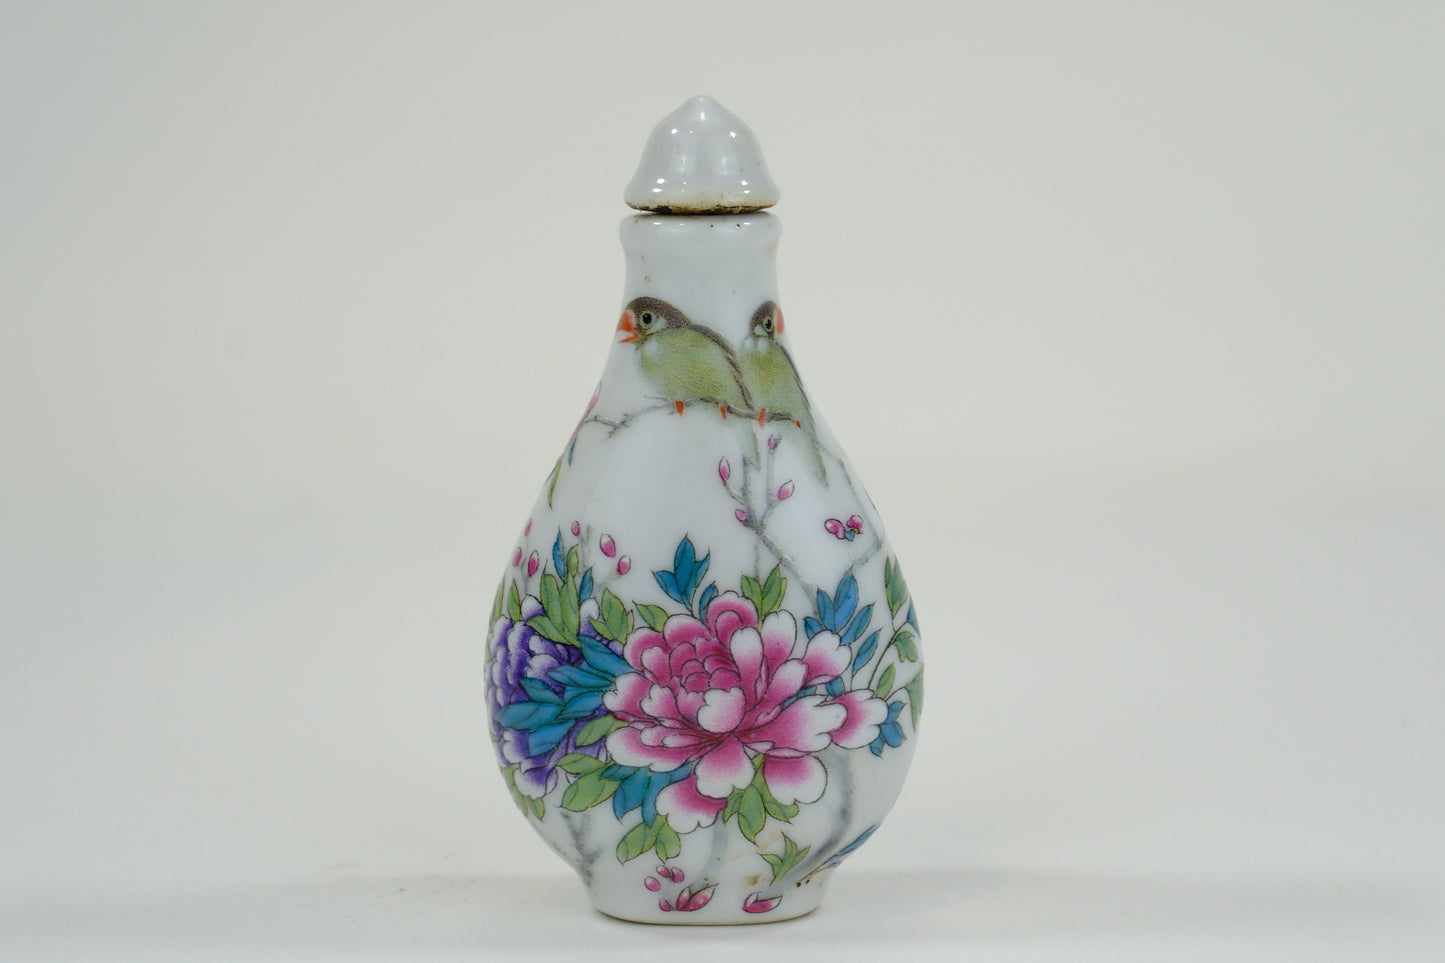 Vintage Chinese Ceramic Snuff Bottle w/ Peonies & Finches 3.25"